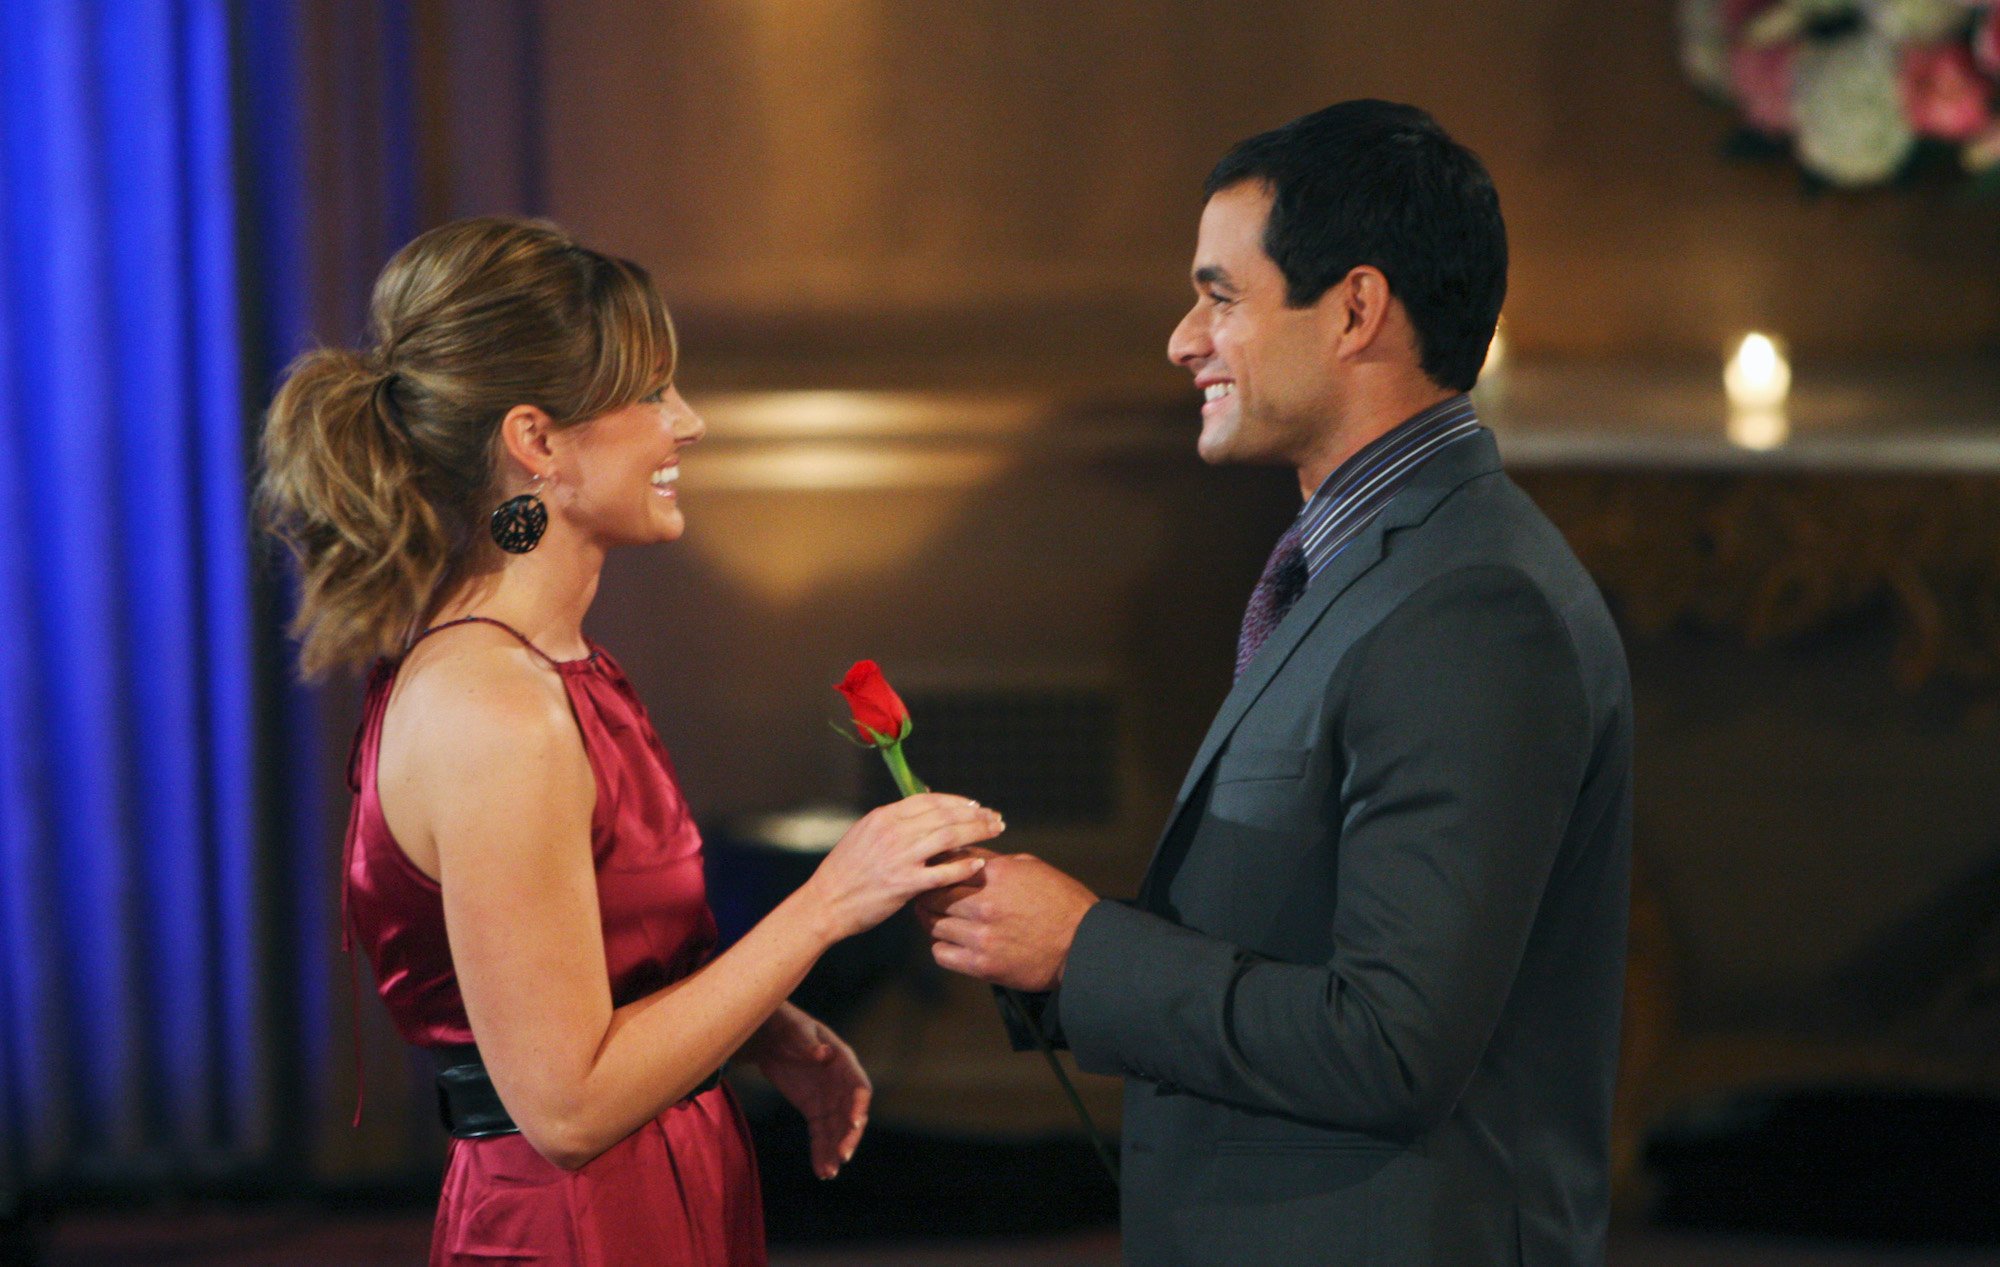 Molly Malaney and Jason Mesnick exchanging a rose after 'The Bachelor' application process